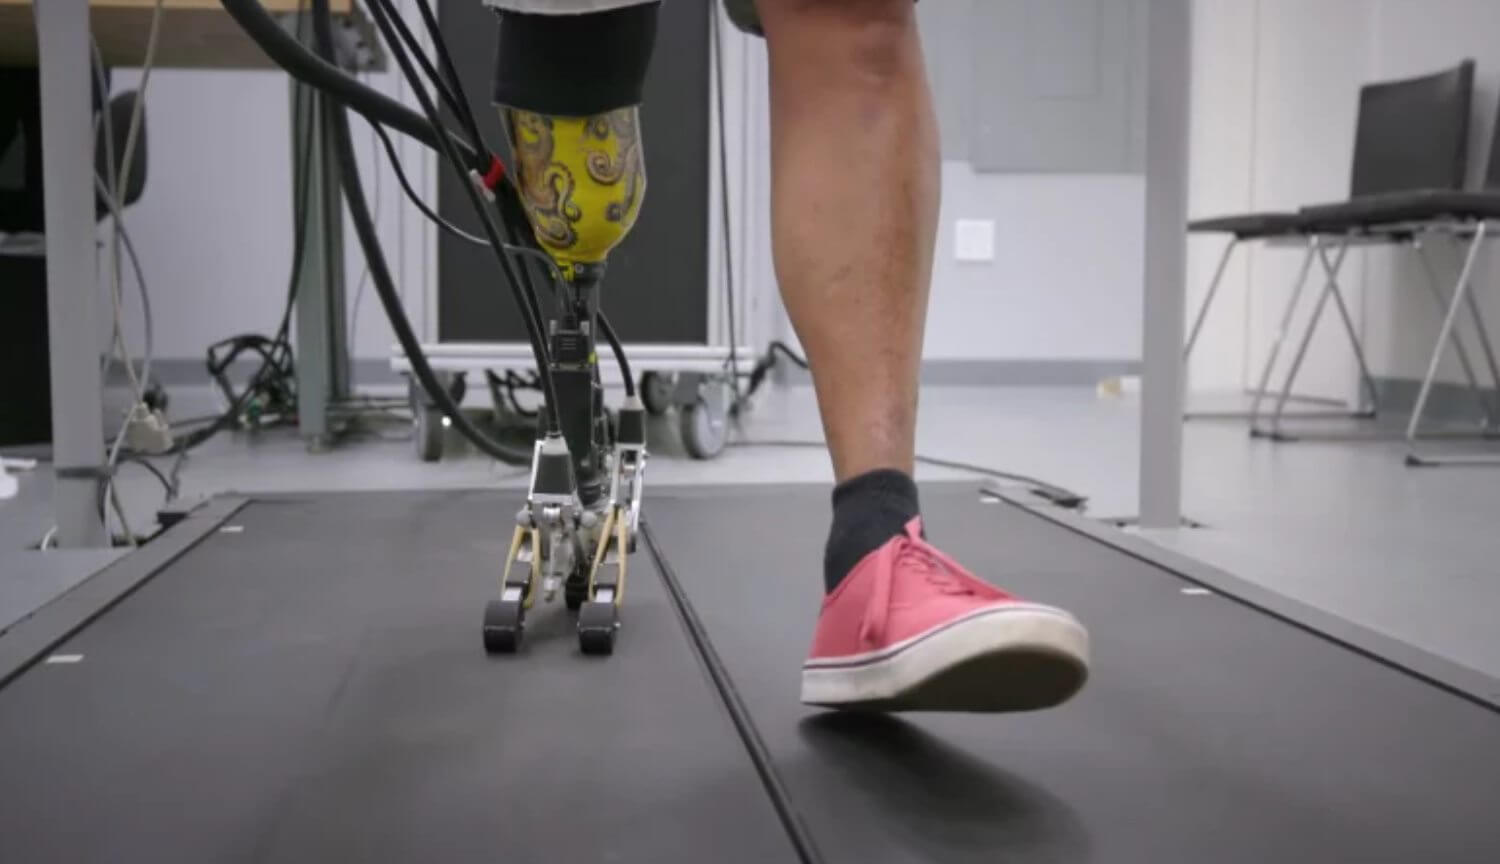 Designed prosthetic leg with realistic foot